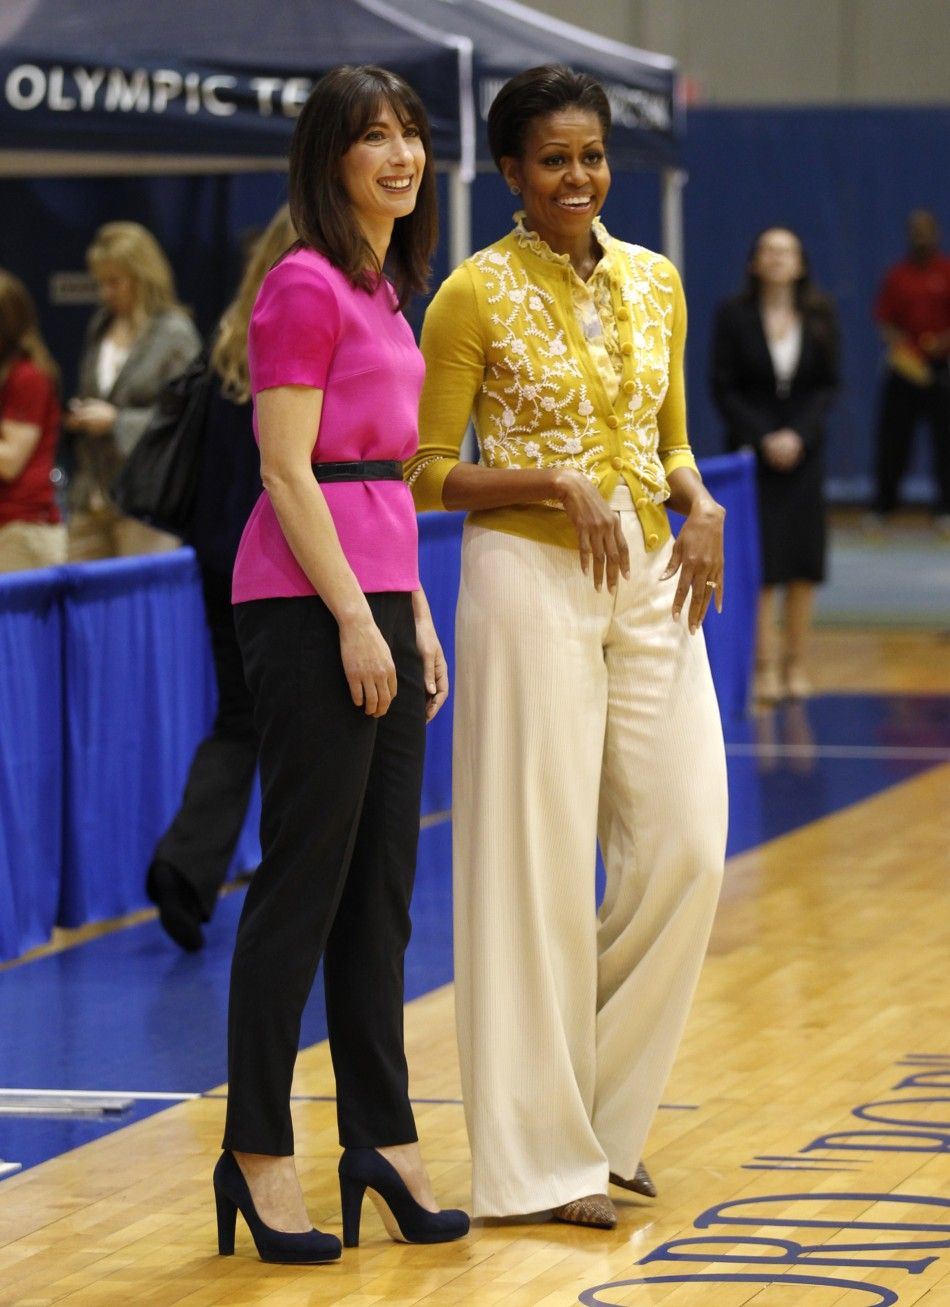 Michelle Obamas Fashion Stance in 2012